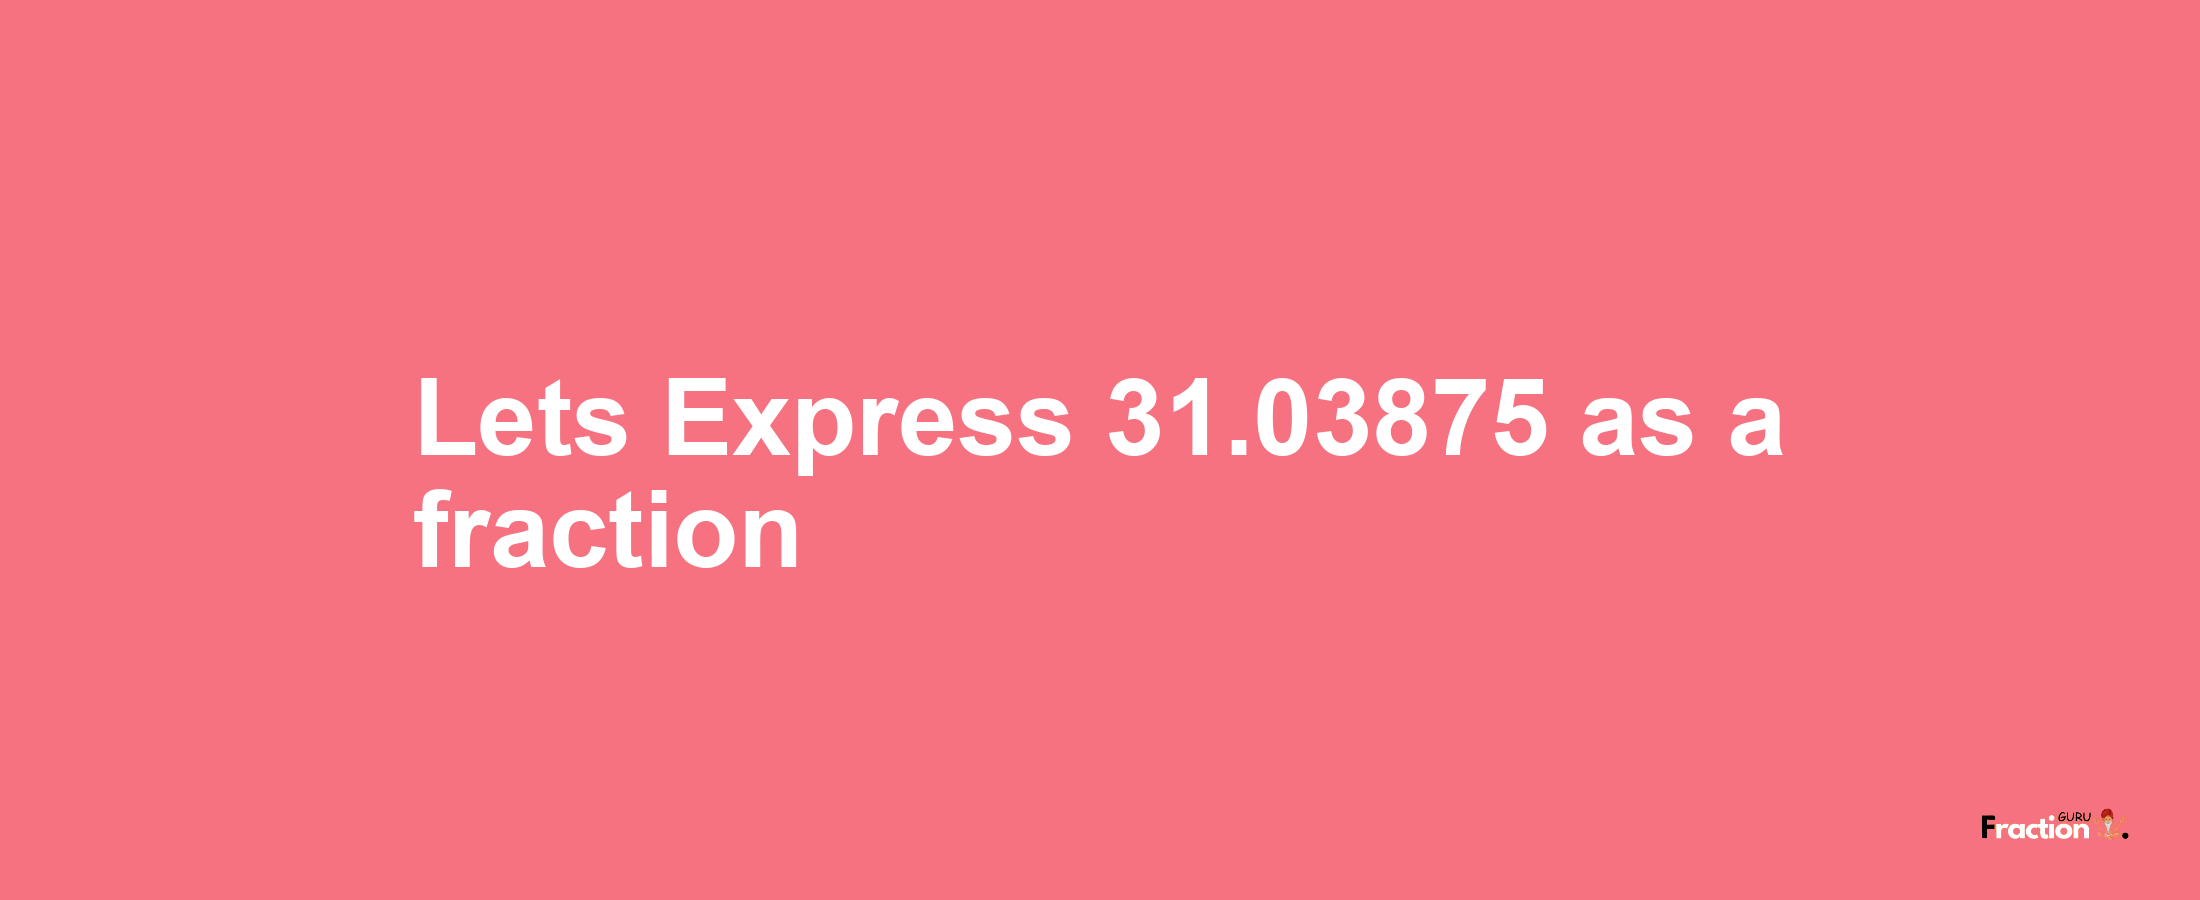 Lets Express 31.03875 as afraction